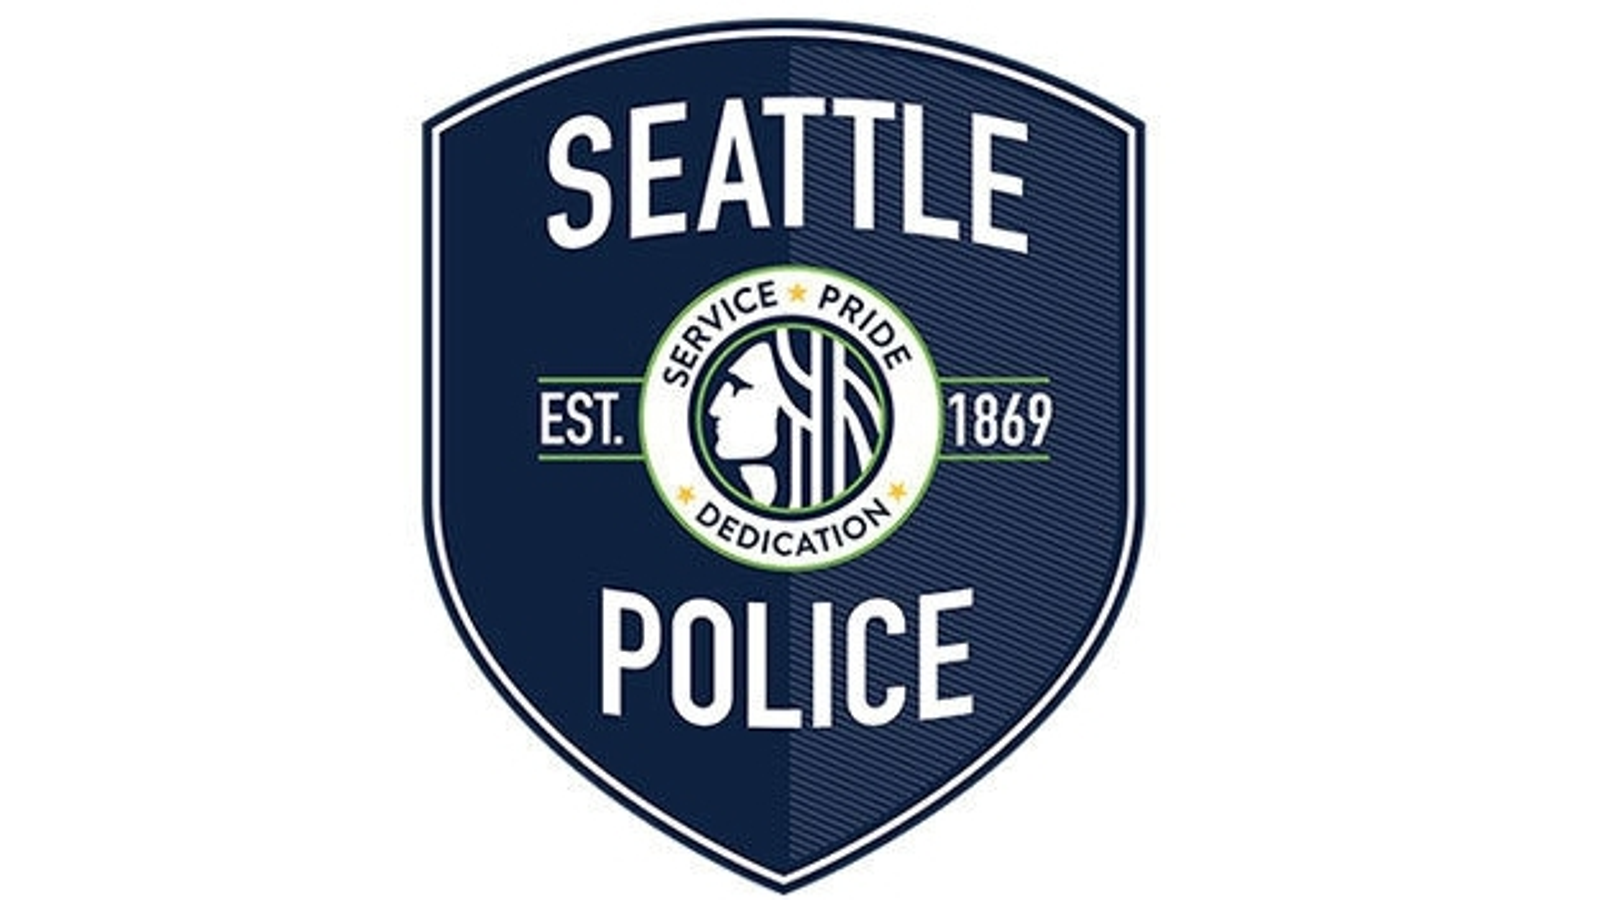 Seattle Police Foundation Provides Round 2 of Citywide Free Steering Wheel  Lock Giveaway - SPD Blotter